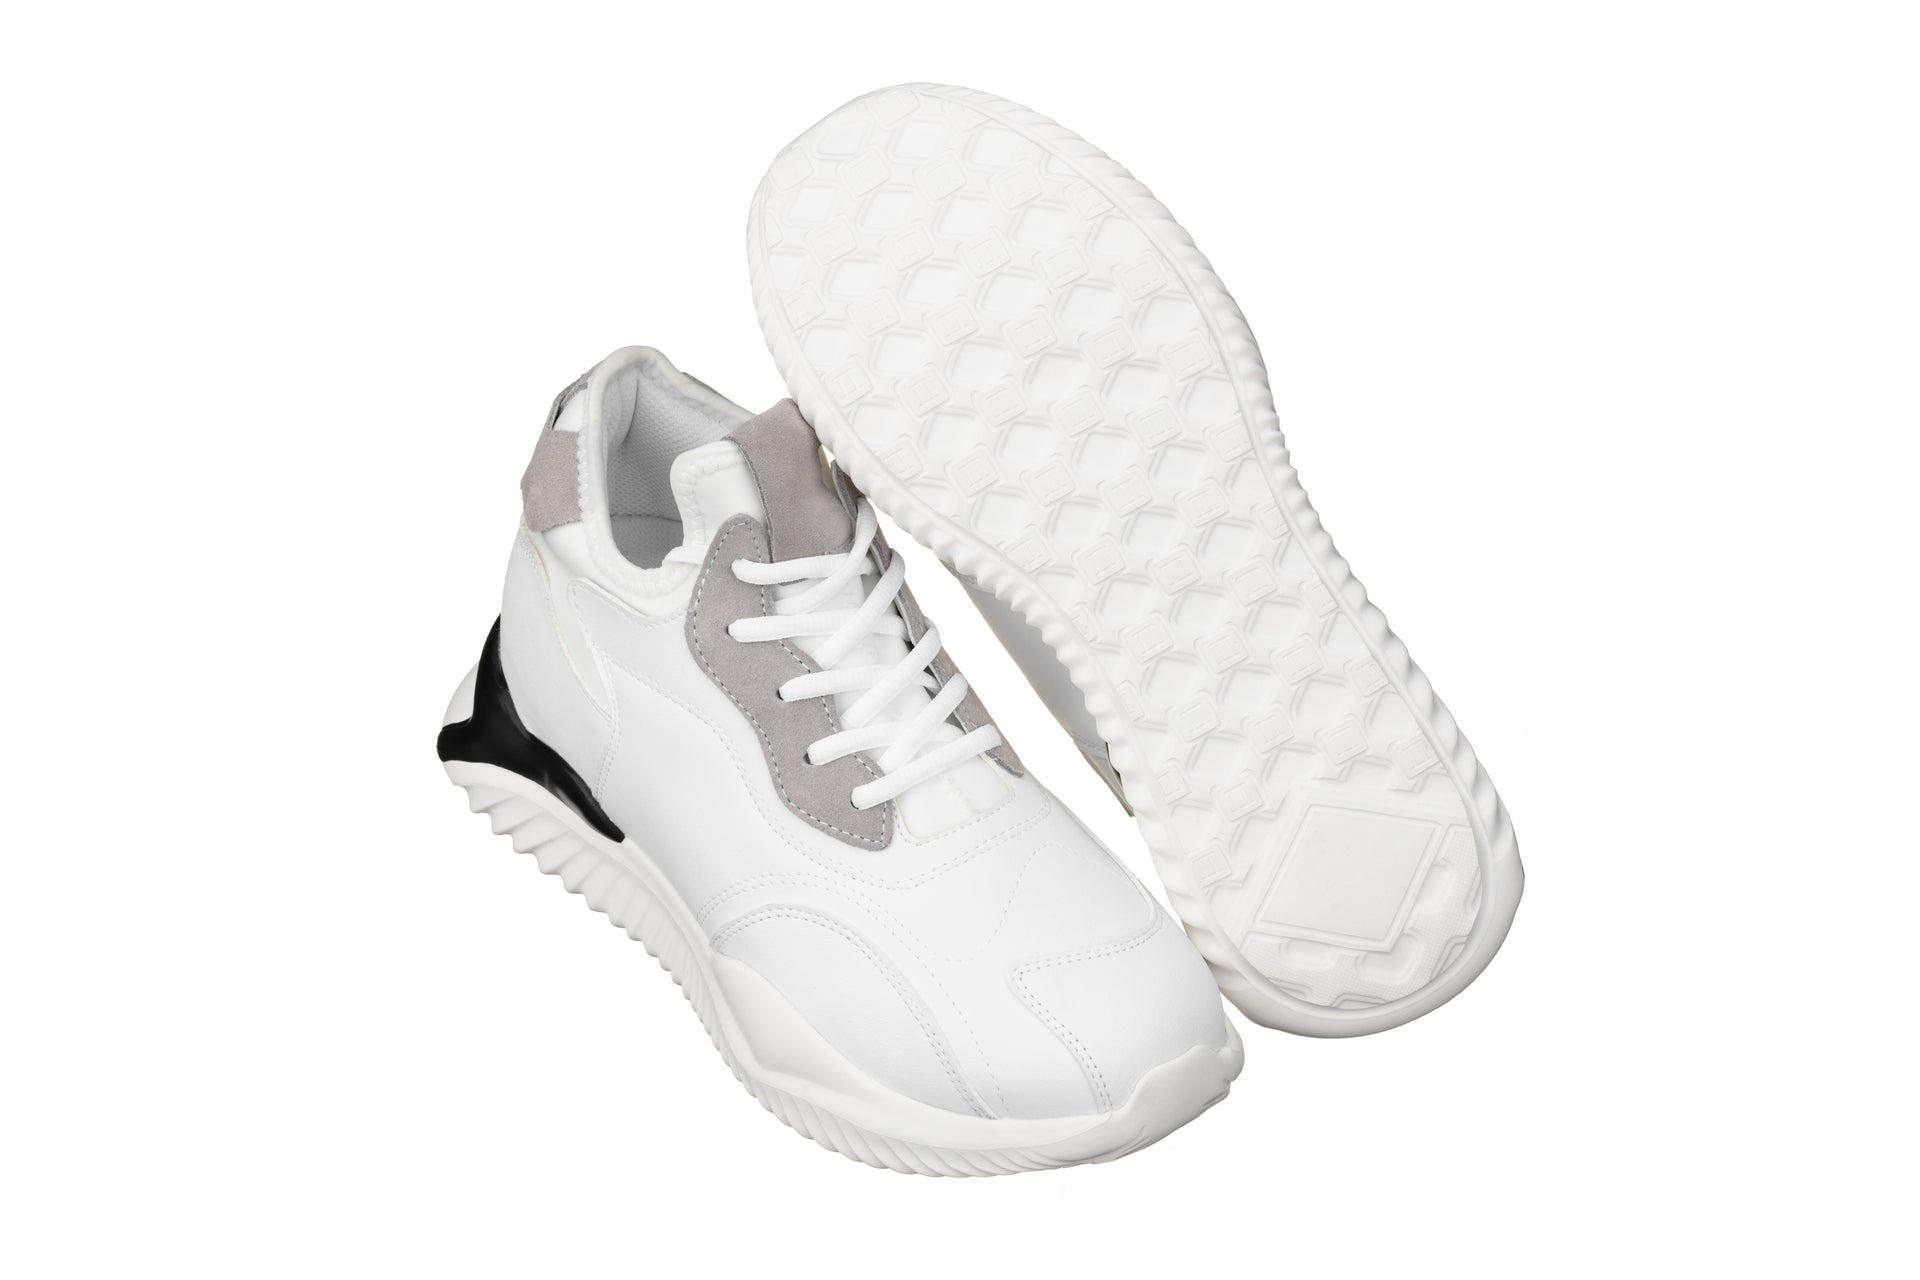 Elevator shoes height increase CALTO - S4204 - 3.2 Inches Taller (White) - Lightweight Sneakers